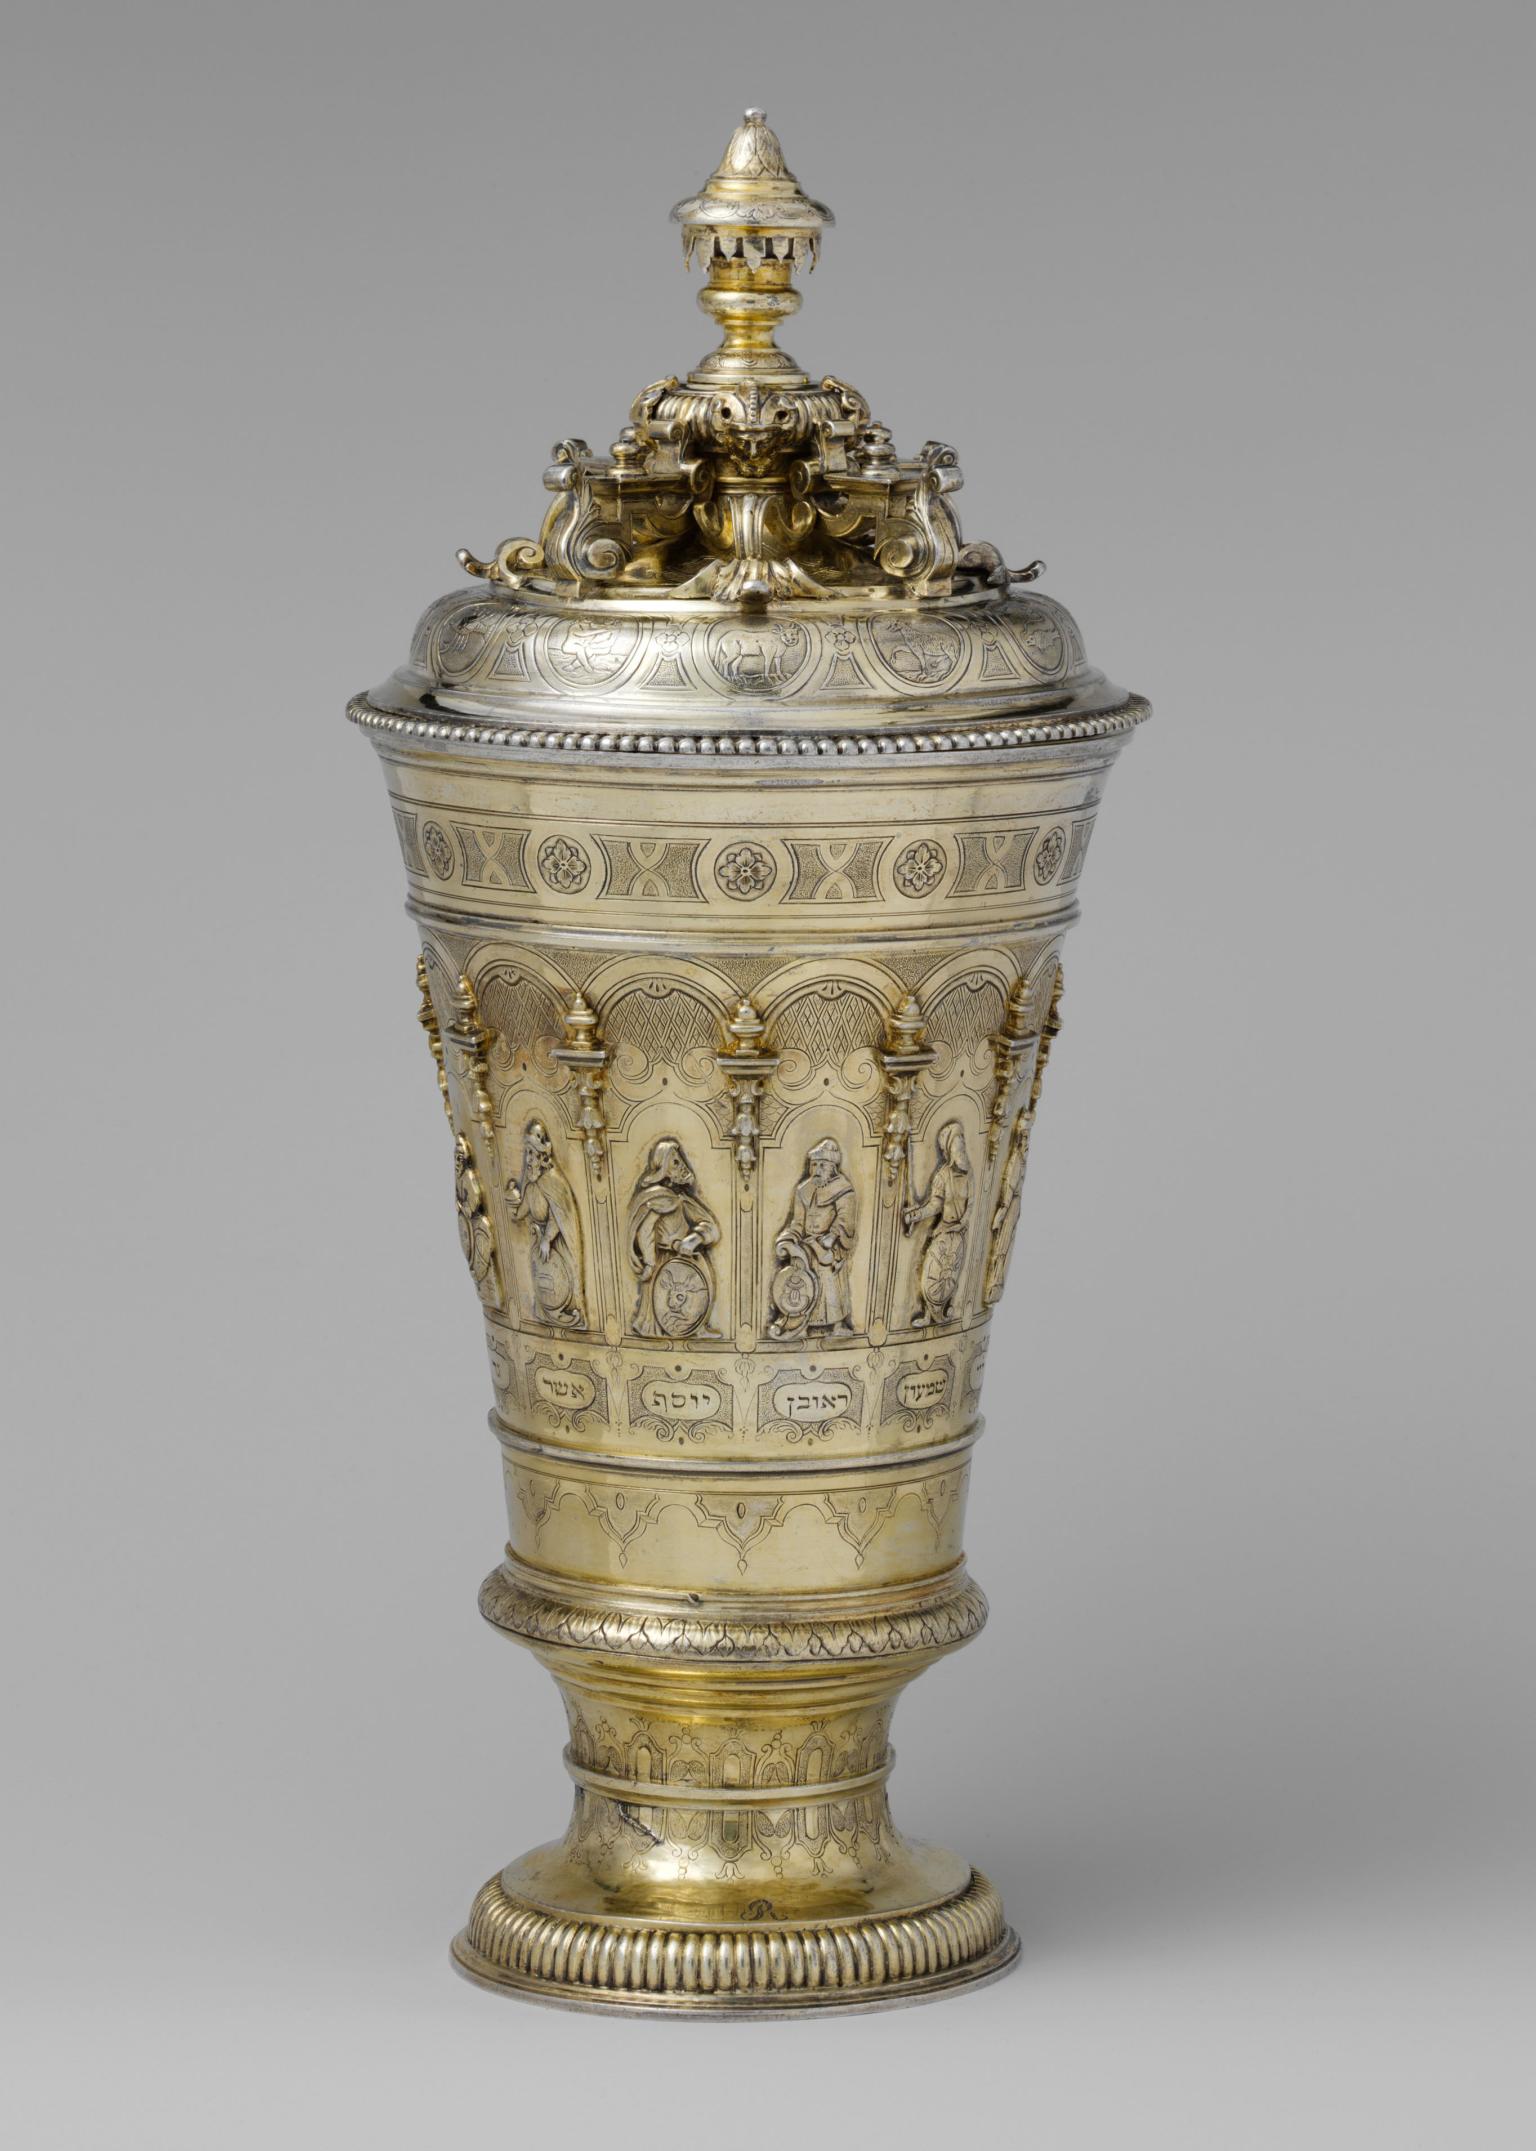 Silver cup with engraving of biblical figures along base and astrological figures and decorative designs on lid. 